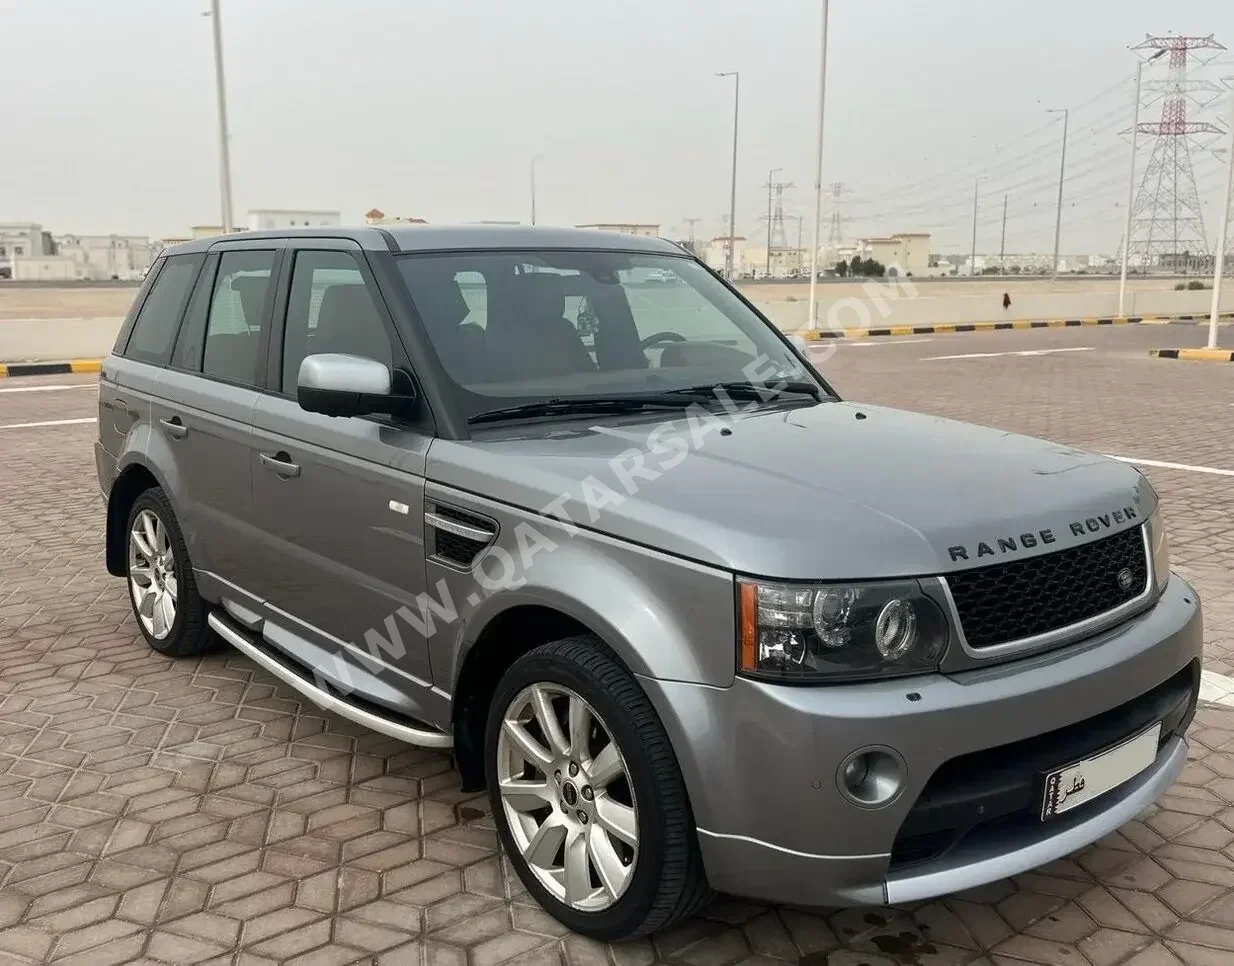 Land Rover  Range Rover  Sport Super charged  2012  Automatic  169,000 Km  8 Cylinder  Four Wheel Drive (4WD)  SUV  White and Gray